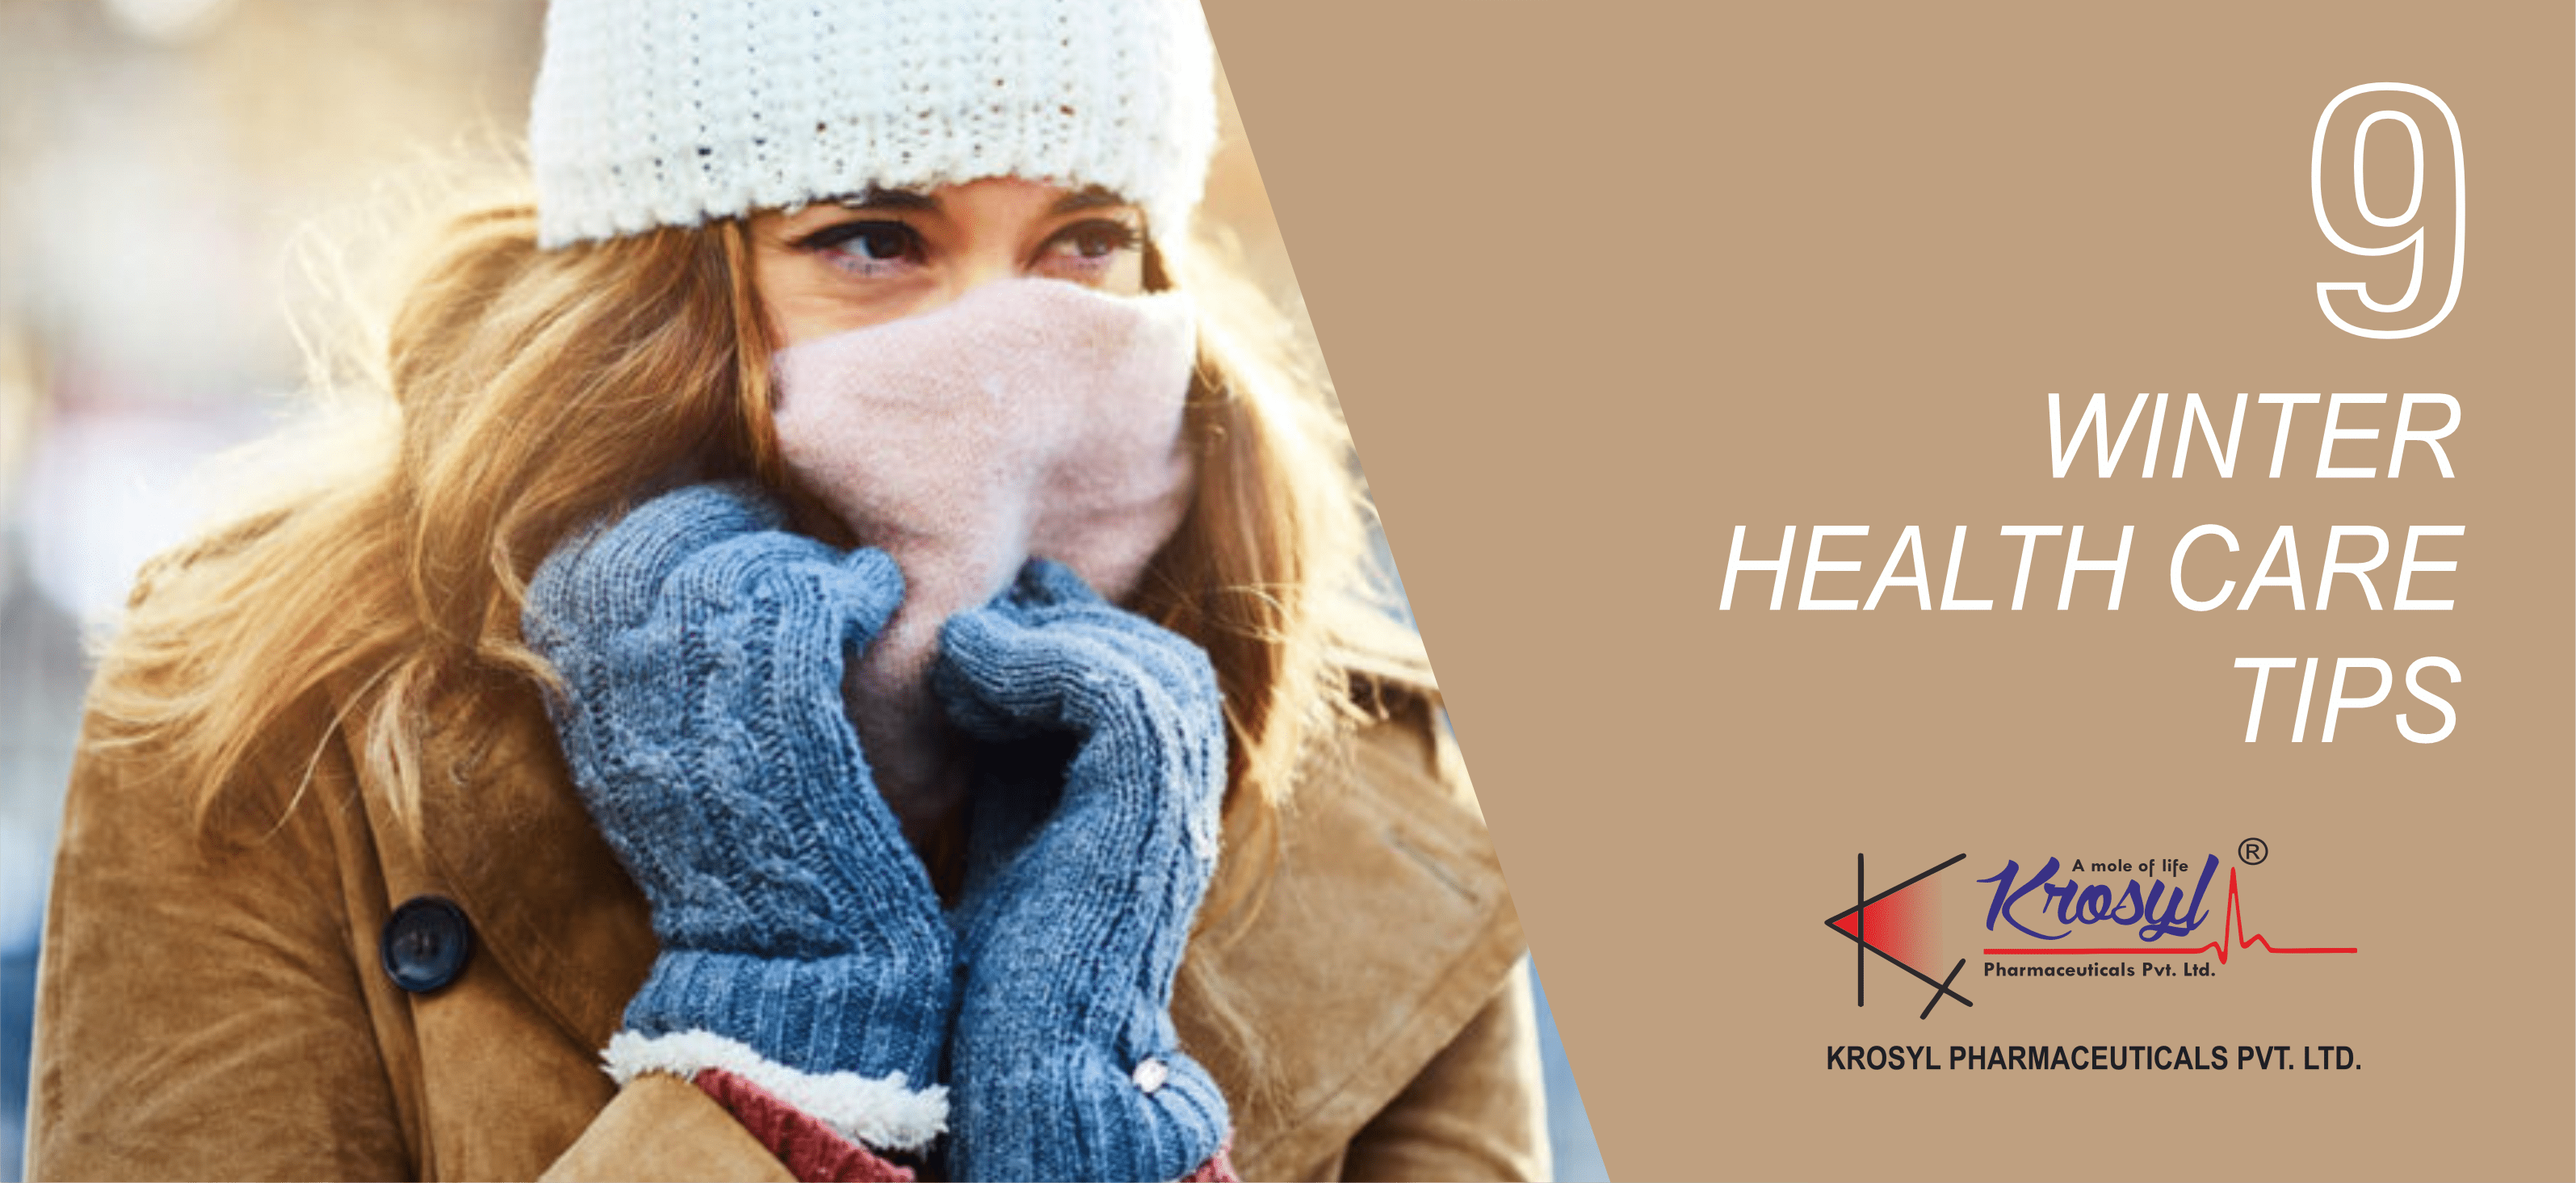 how to take care of health in winter, what to do for health in winter